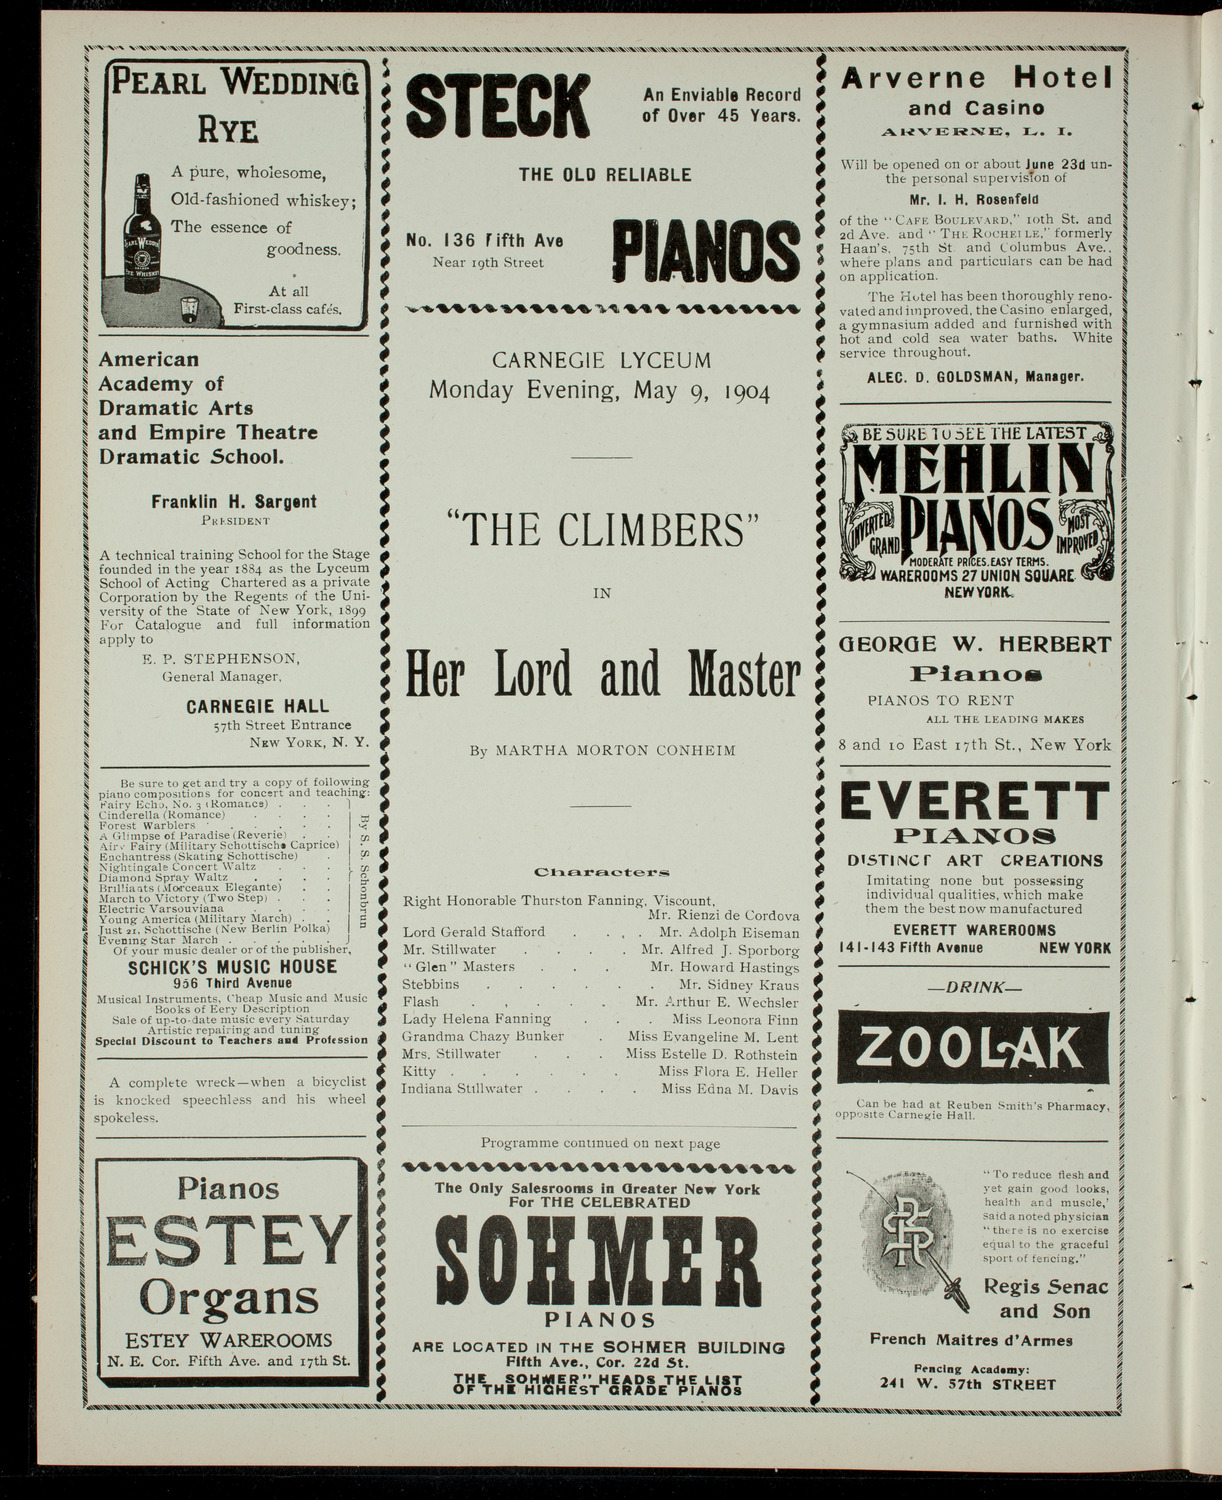 The Climbers in "Her Lord and Master", May 9, 1904, program page 2